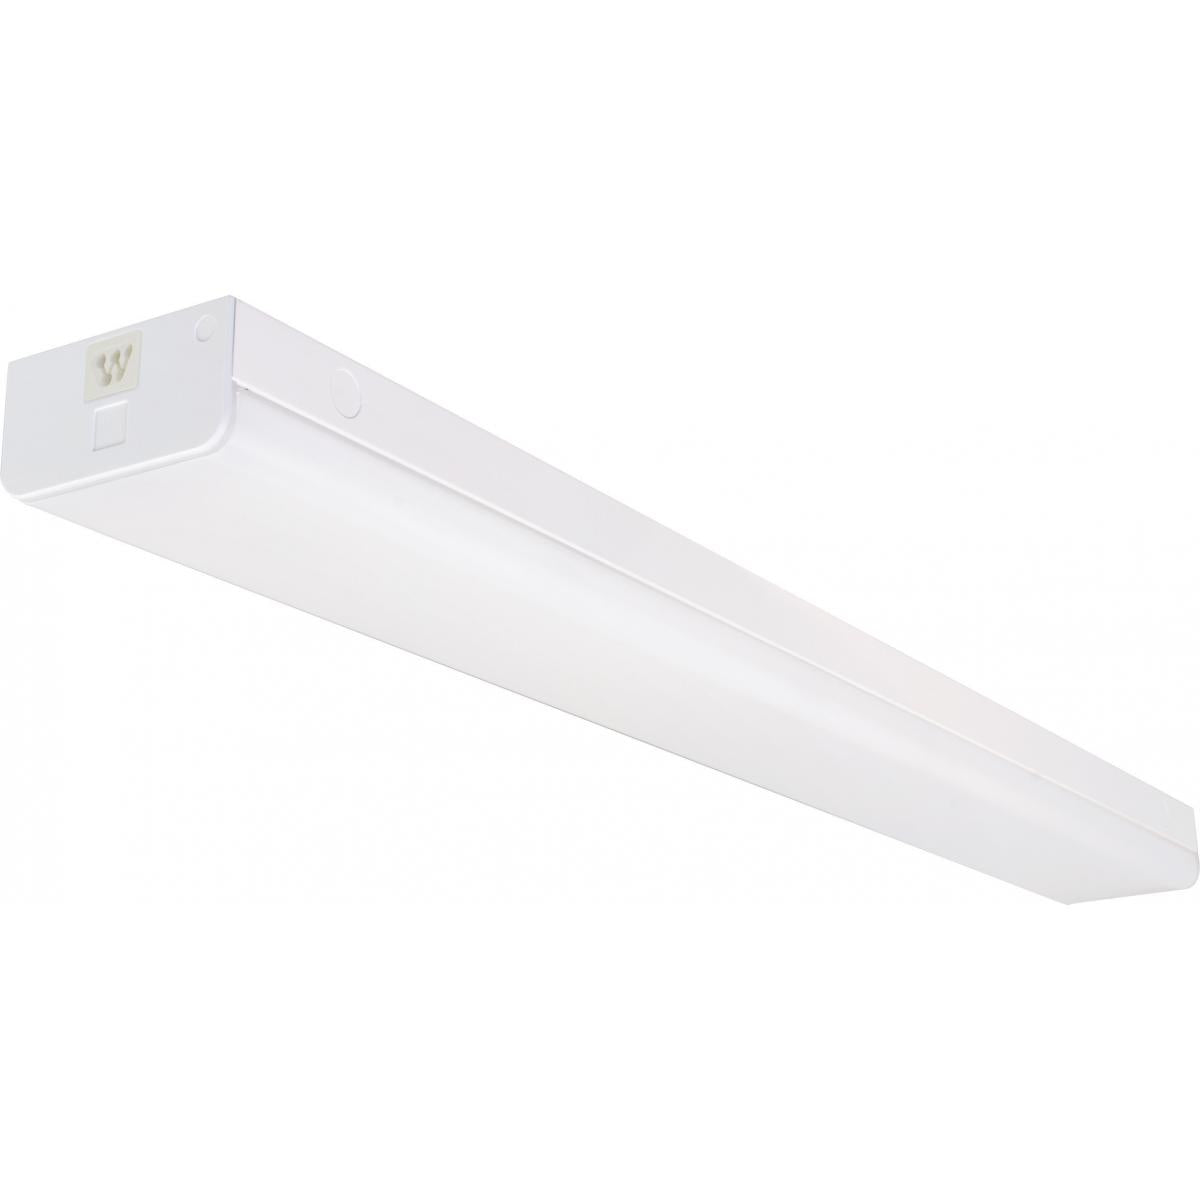 Satco 65-1145 LED 4 ft. Wide Strip Light 40W 4000K White Finish Connectible with Sensor